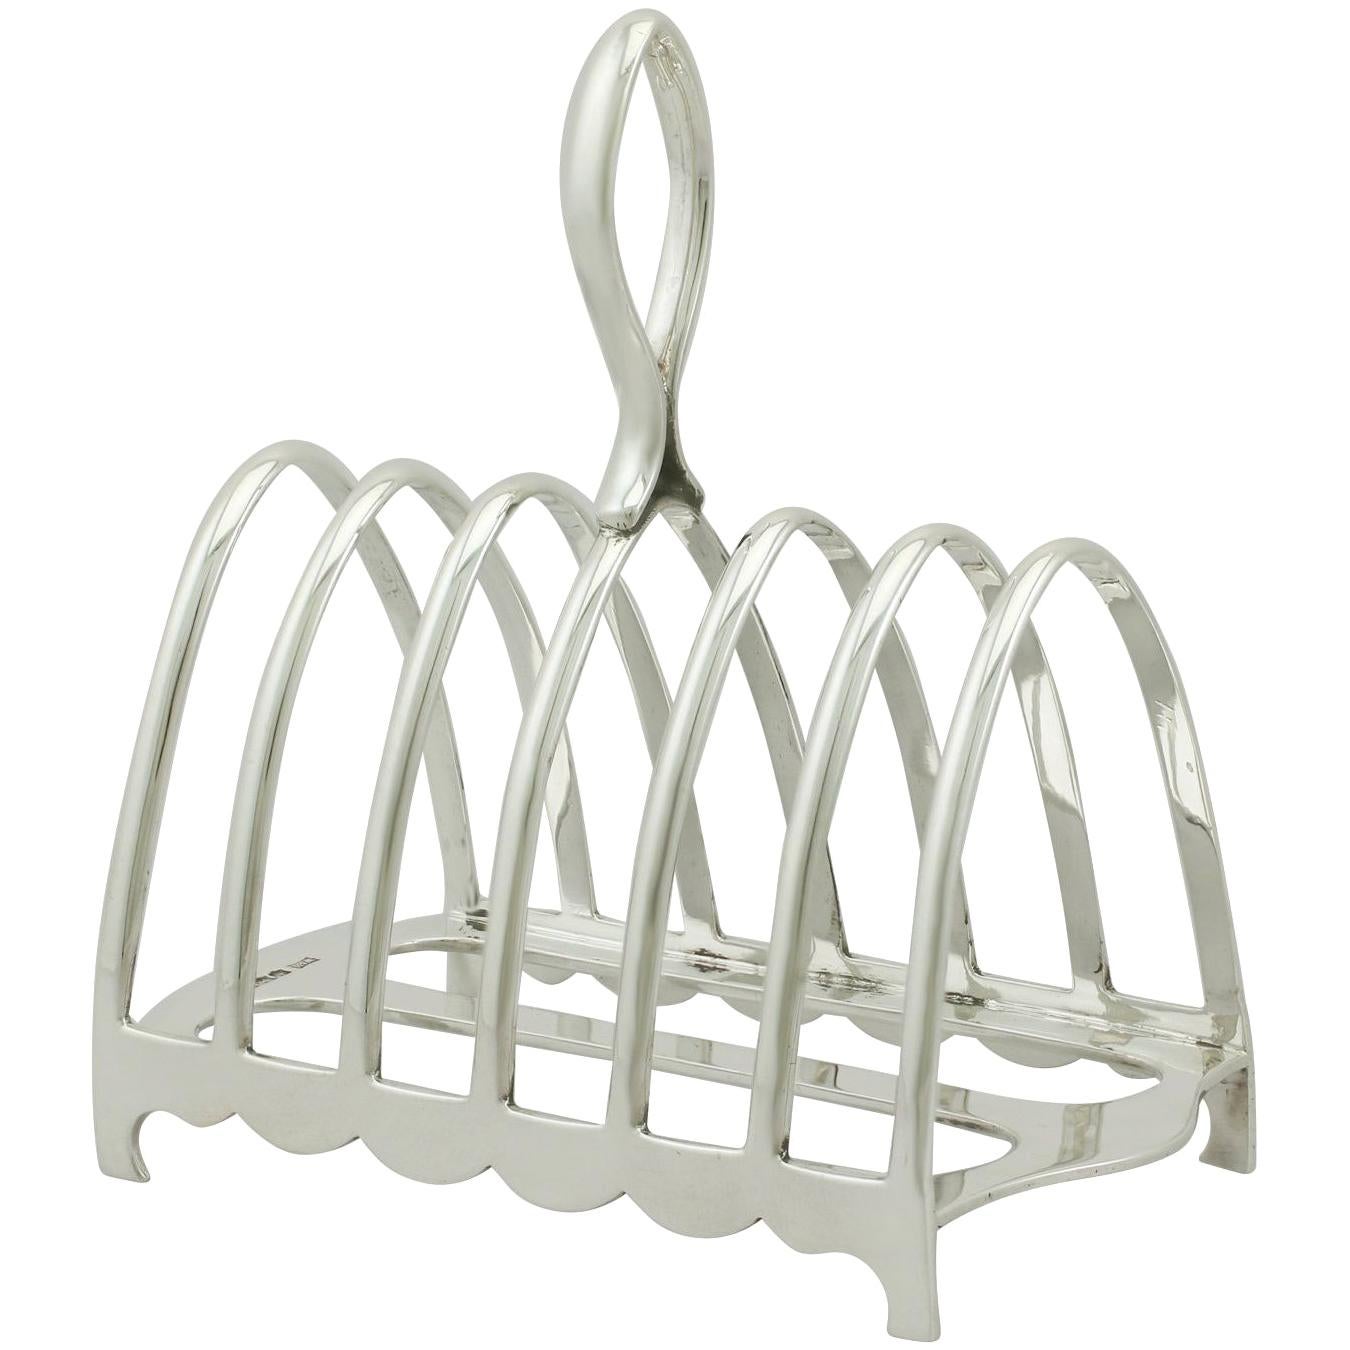 1920s Antique Sterling Silver Toast Rack by Walker & Hall